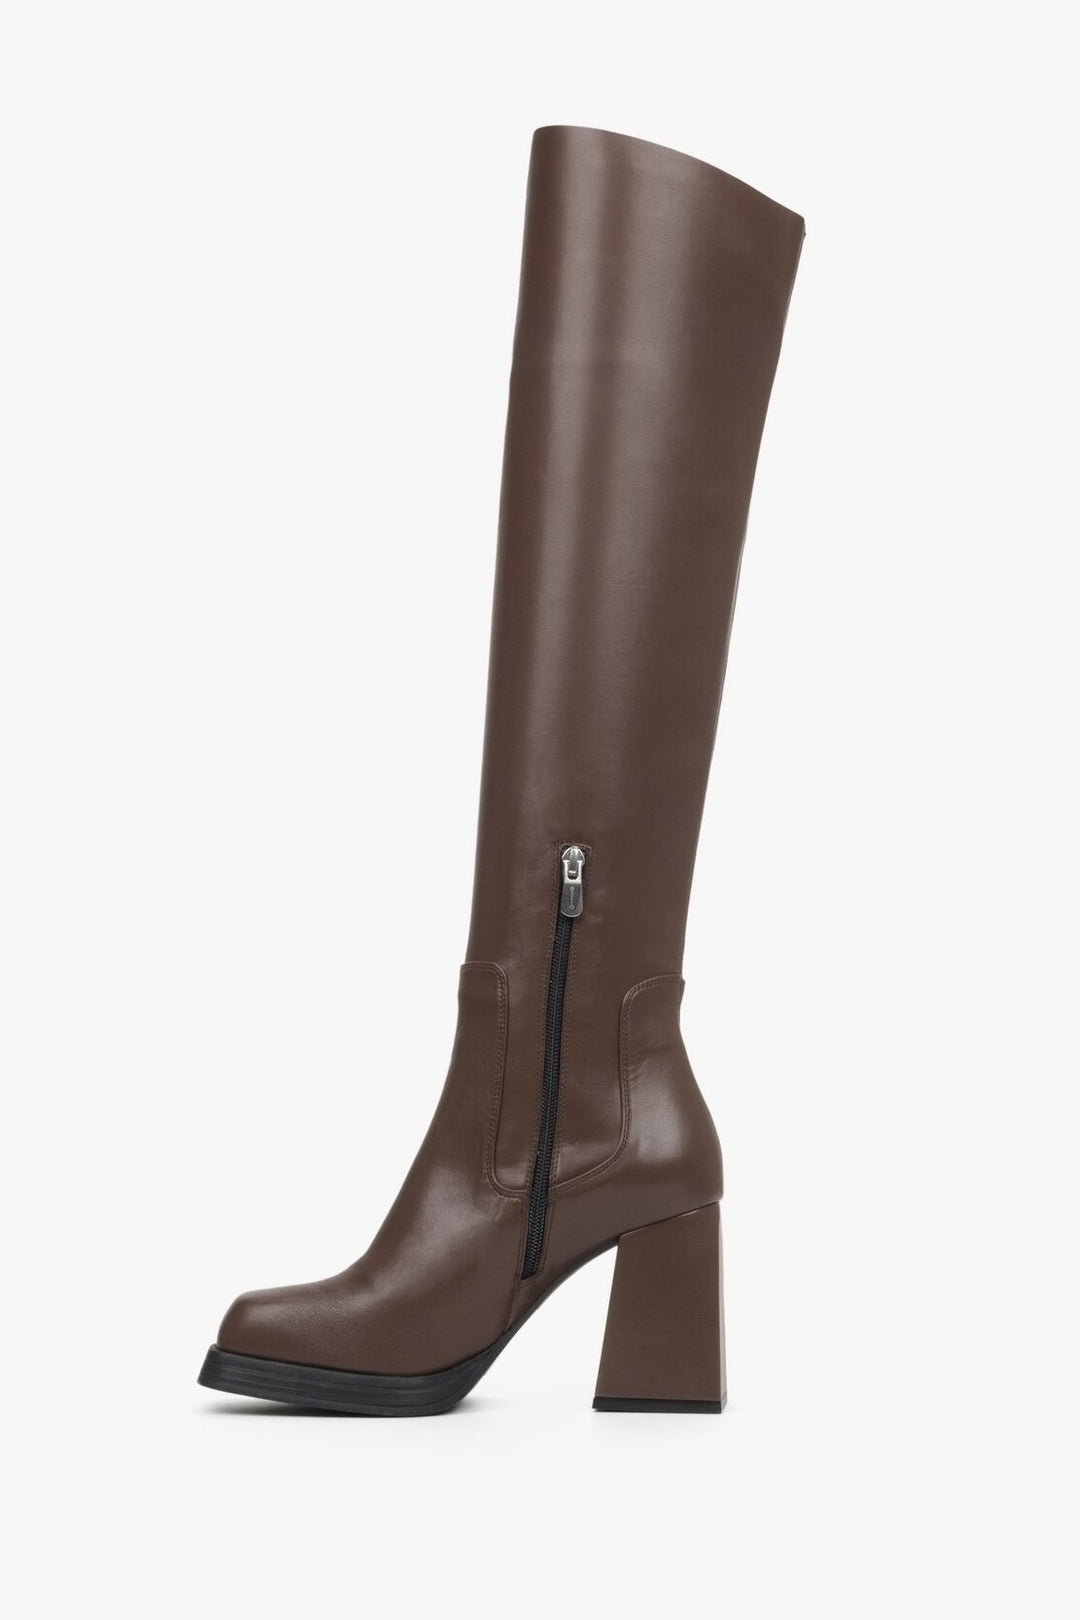 Stylish knee high boots made of saddle brown genuine leather Estro - shoe profile.